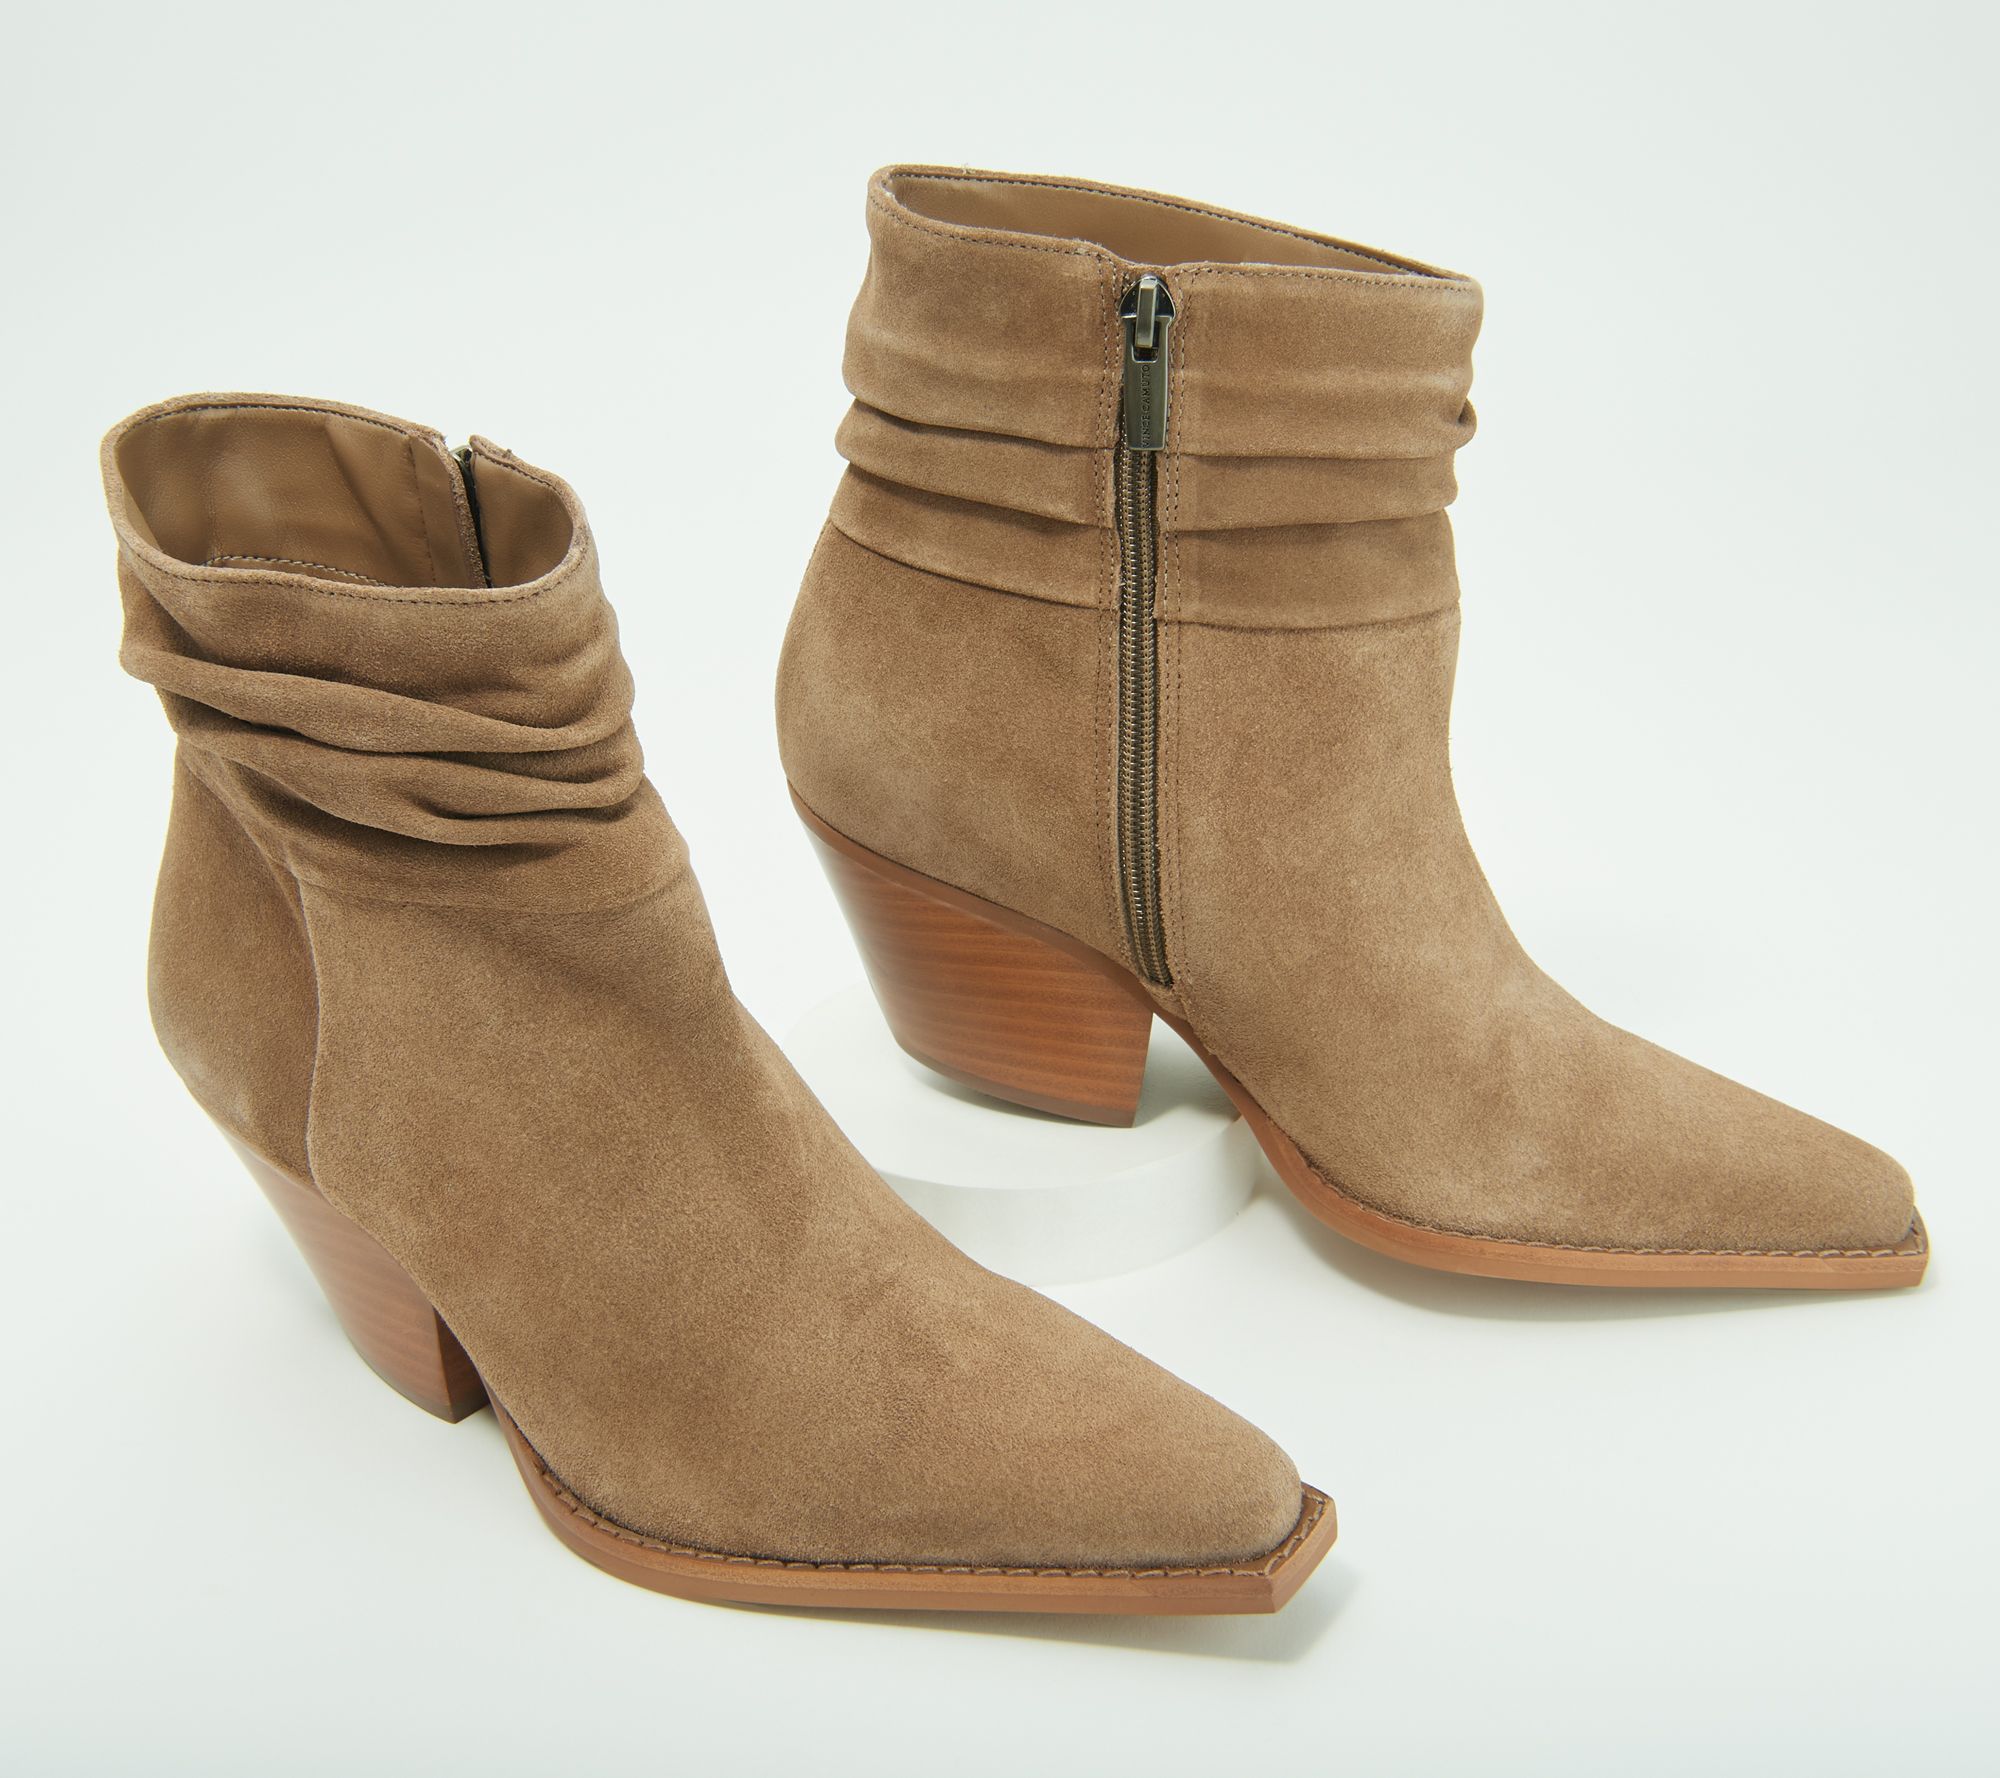 Vince Camuto Leather or Suede Moto Ankle Boots - Erillie 